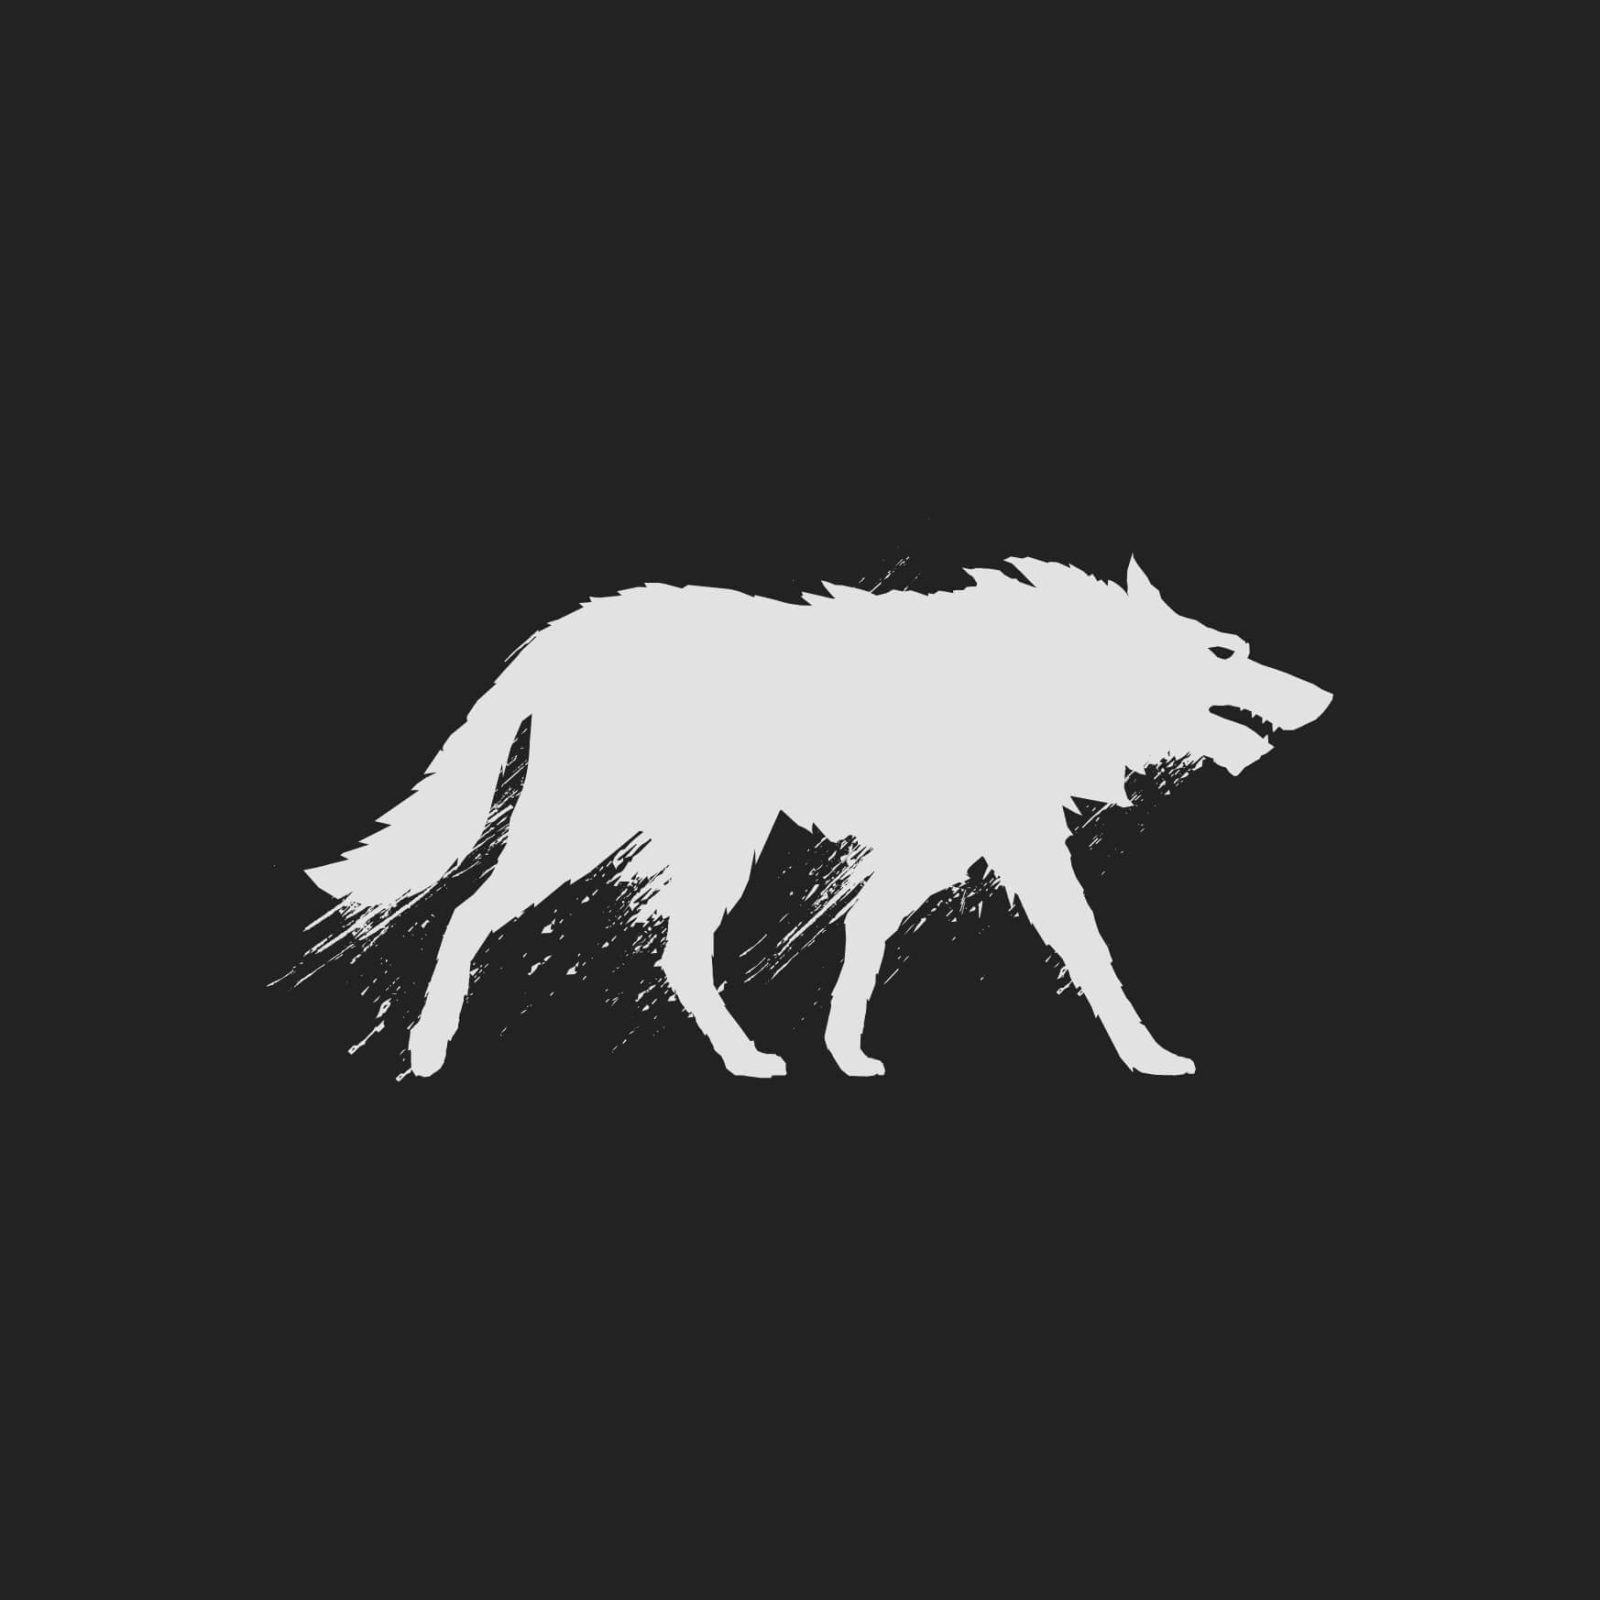 White silhouette of a wolf on a black background, depicted in a walking pose with a textured, brush stroke style perfect for brand design.